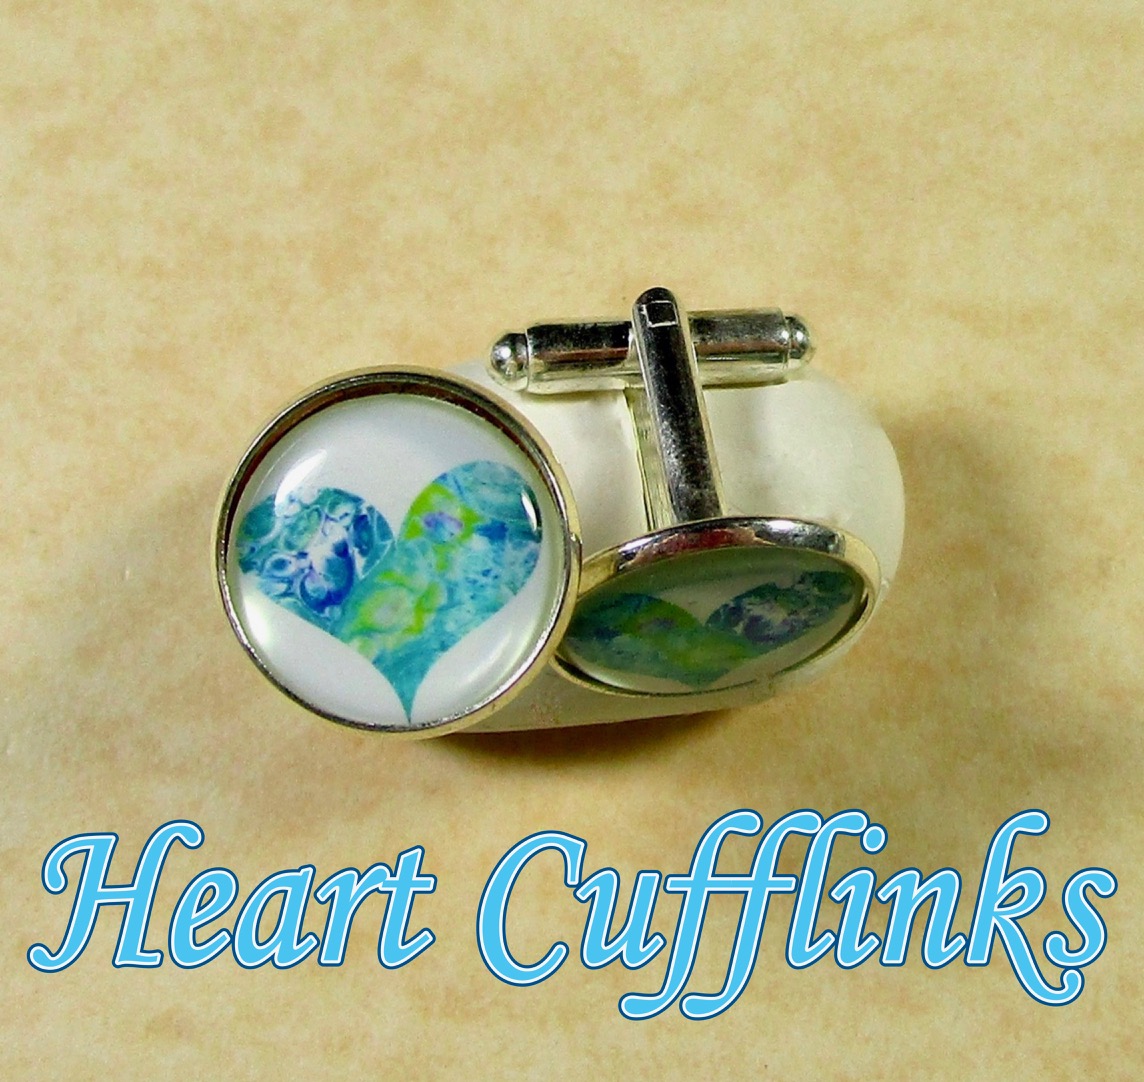 RT @PaintedbyCarol: Give him your heart with these unique cufflinks from my Etsy shop. 
 https://t.co/oOSw1eGHEE https://t.co/UvitE9sIQt